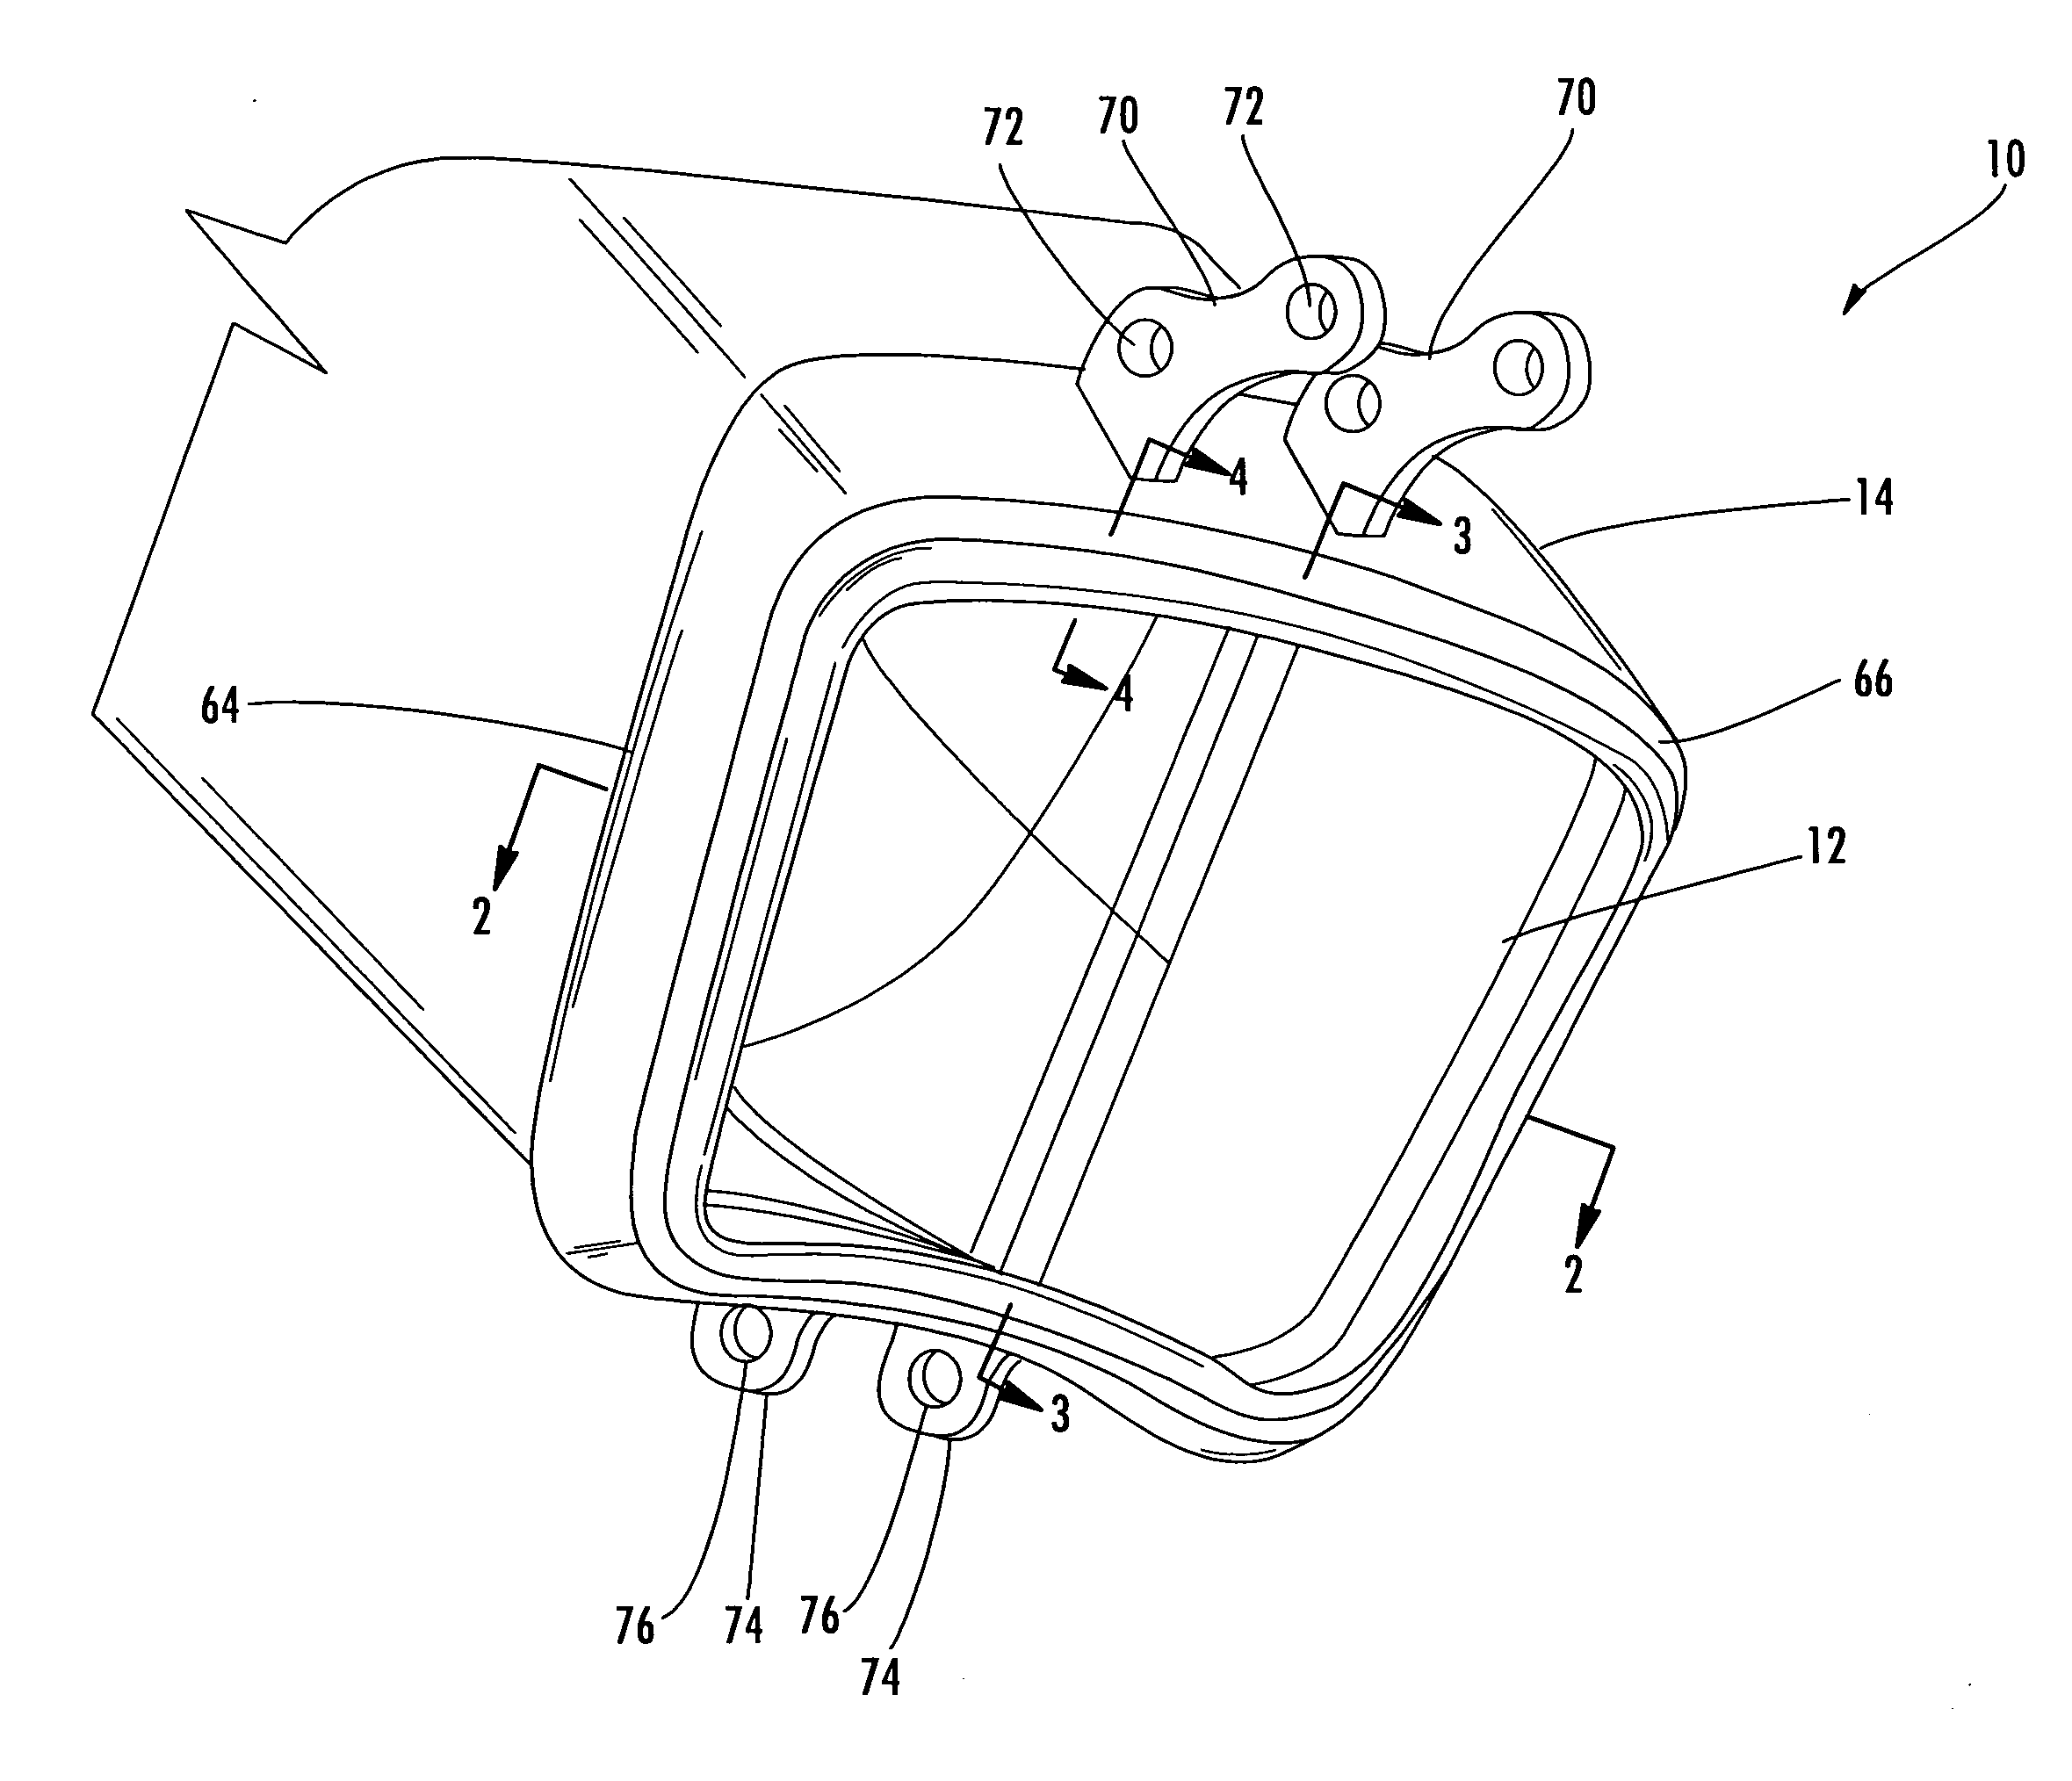 Transition support system for combustion transition ducts for turbine engines